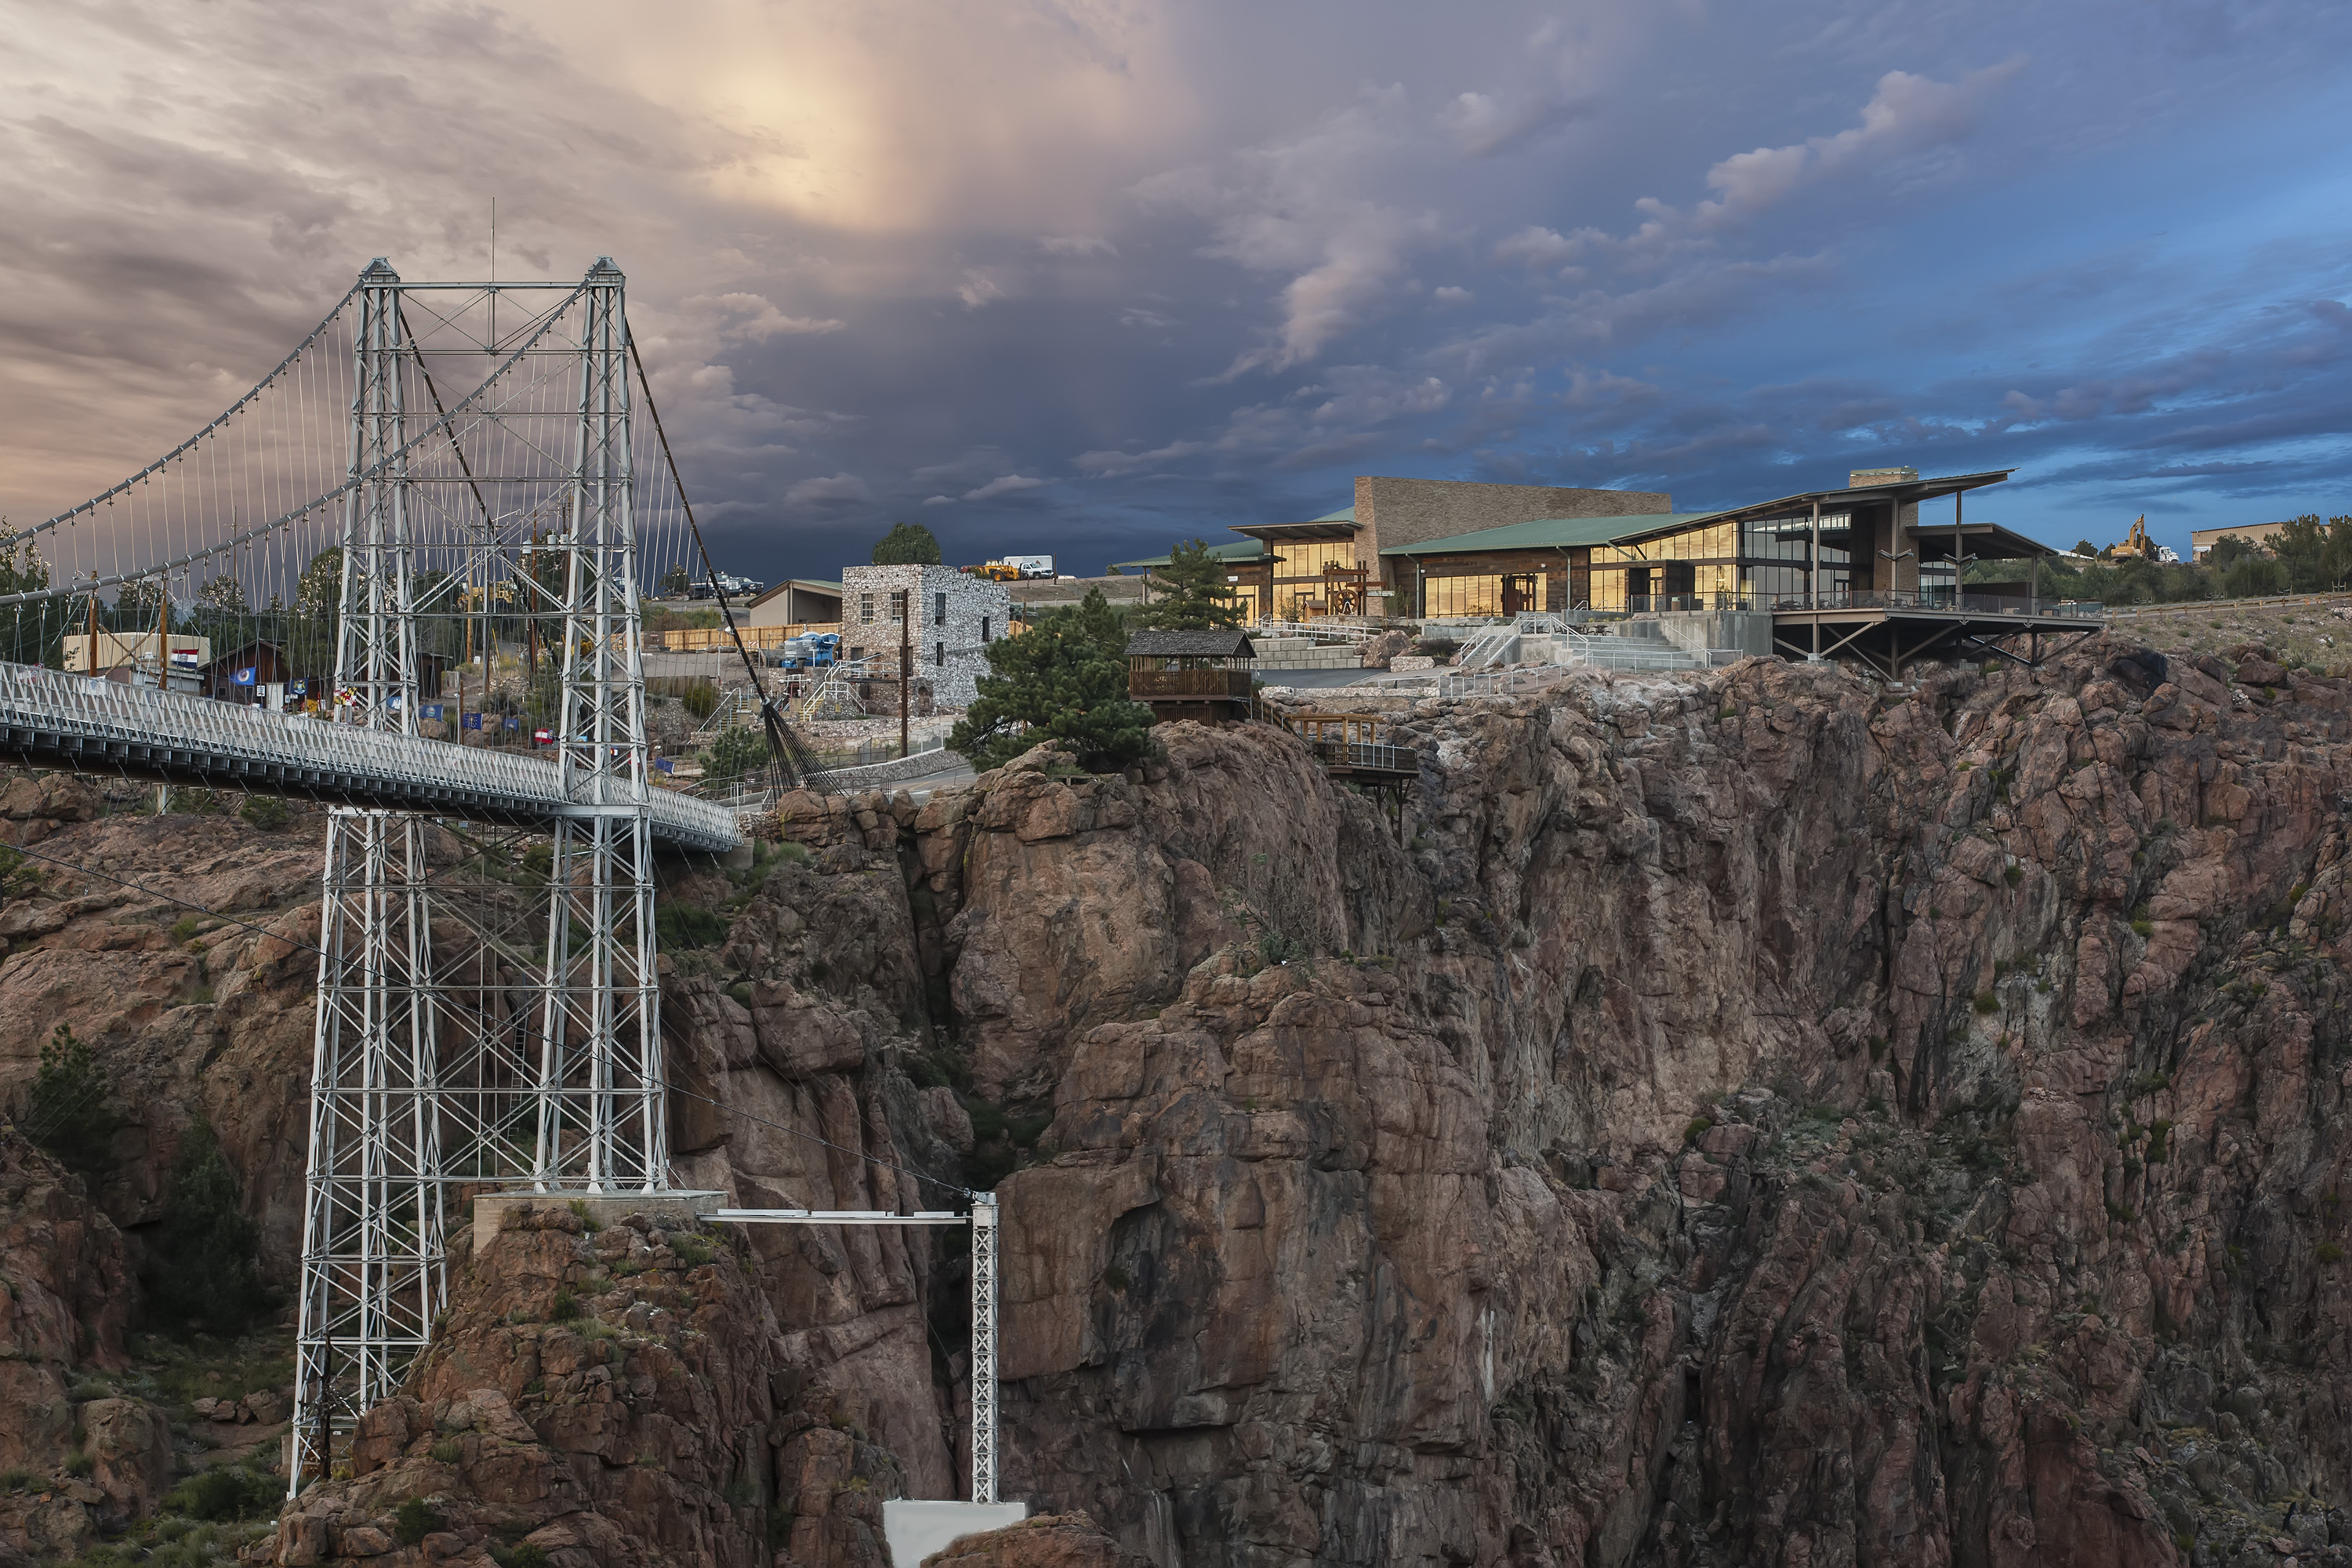 The Royal Gorge Bridge and Park Visitor Center